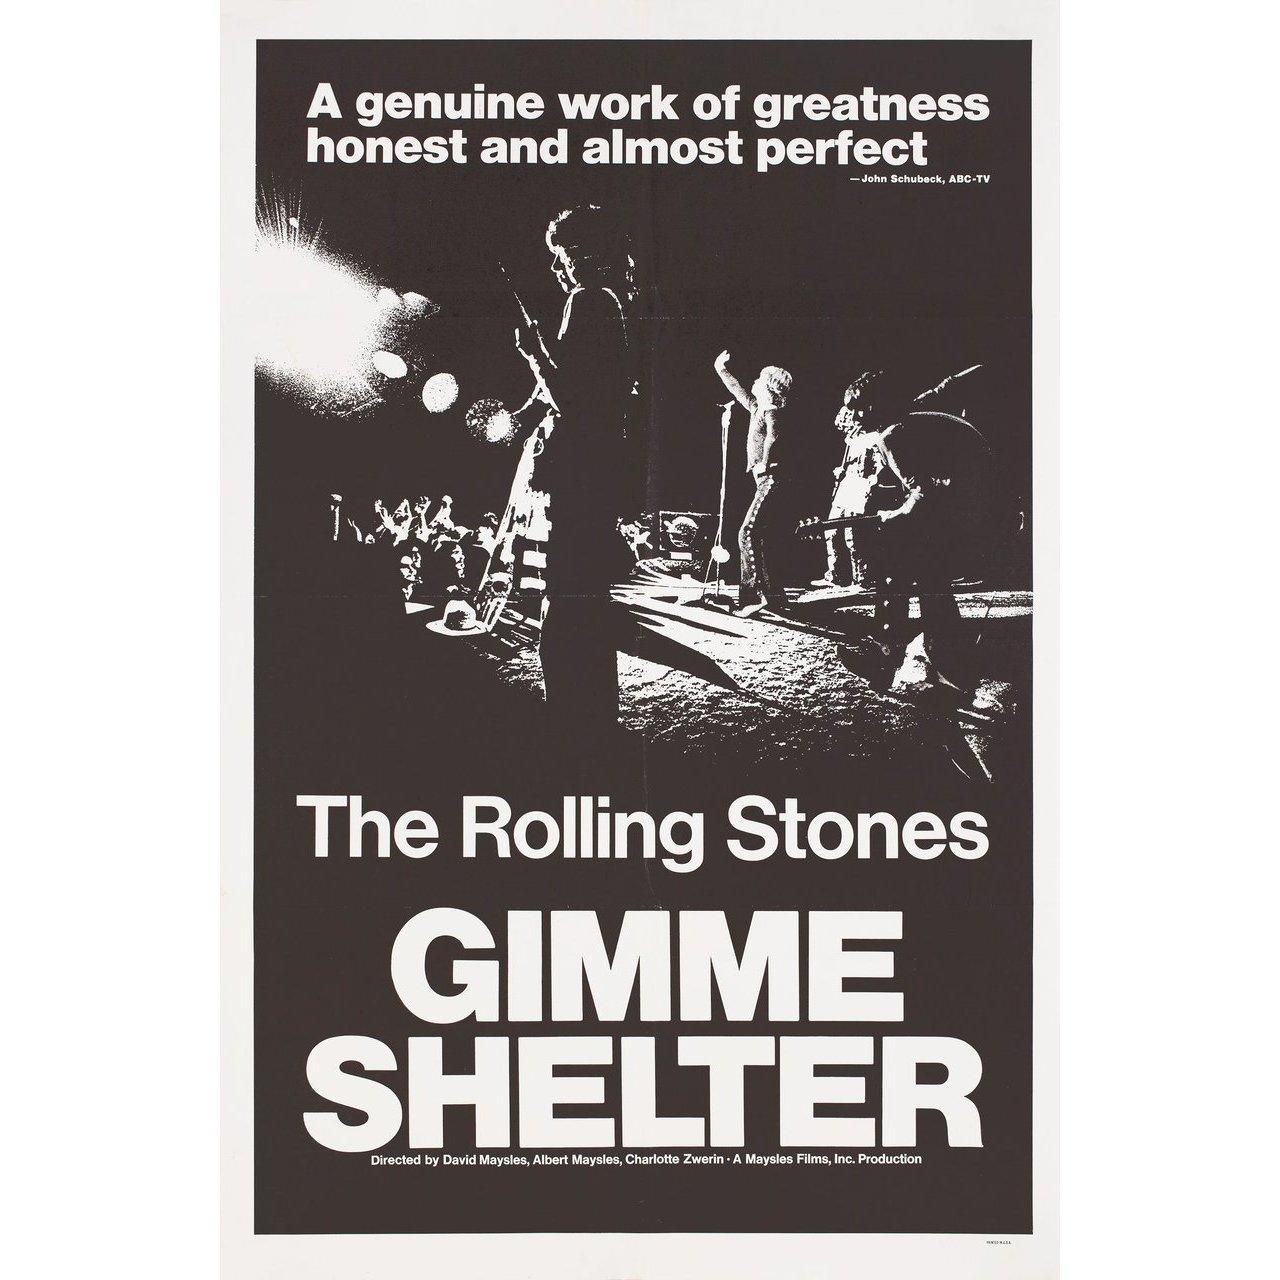 Original 1971 U.S. one sheet poster for the documentary film Gimme Shelter directed by Albert Maysles / David Maysles / Charlotte Zwerin with The Rolling Stones / Mick Jagger / Charlie Watts / Keith Richards. Very Good condition, folded. Many